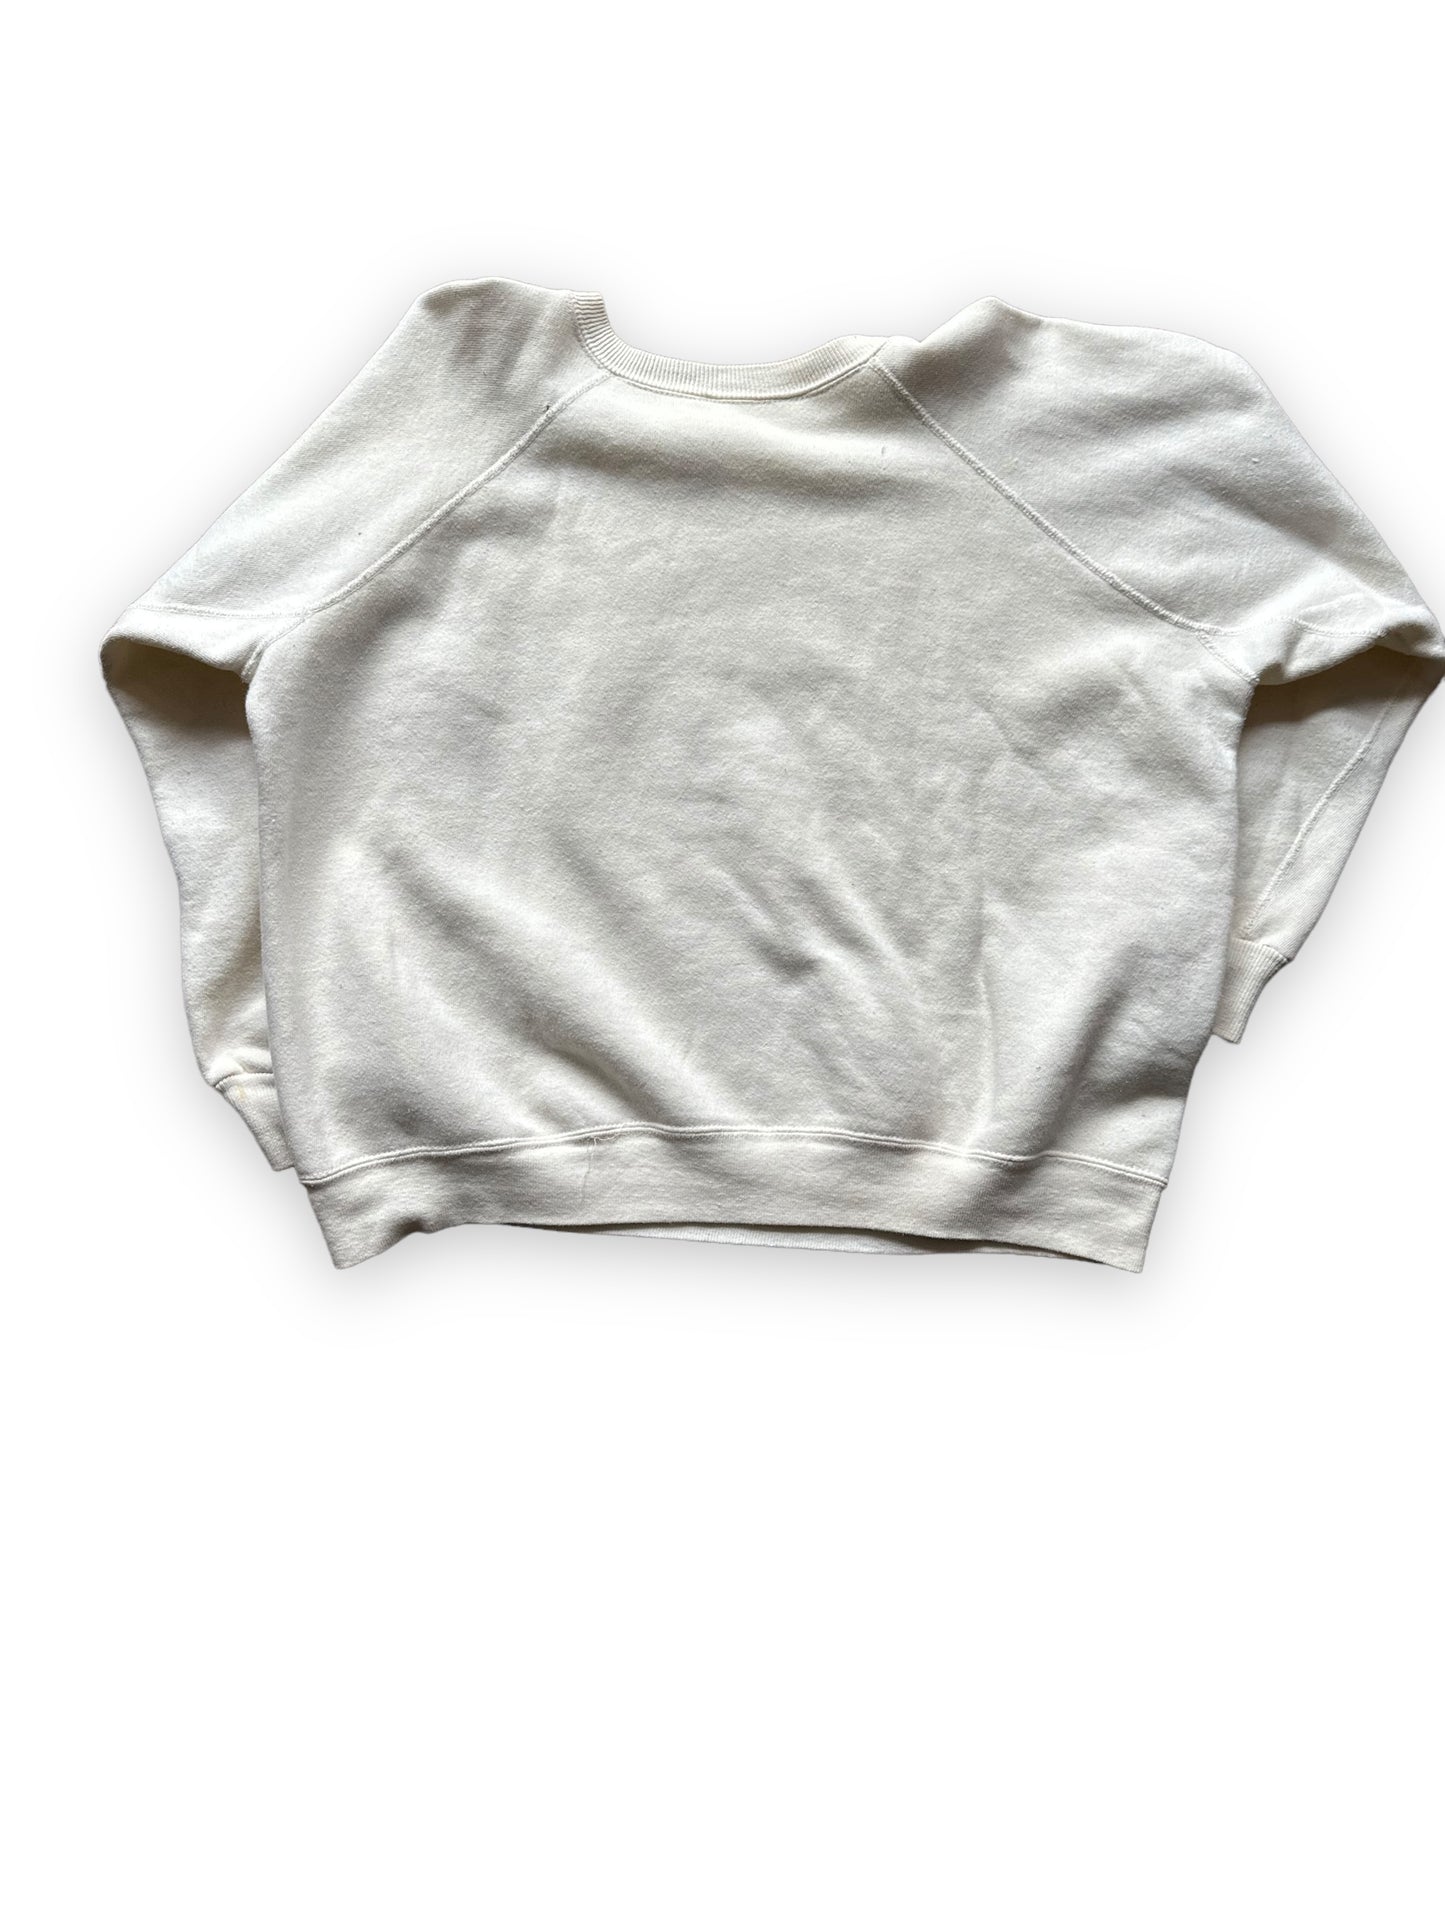 Rear View on Vintage Girls State White Crewneck Sweatshirt SZ XL |  Vintage Crewneck Sweatshirt Seattle